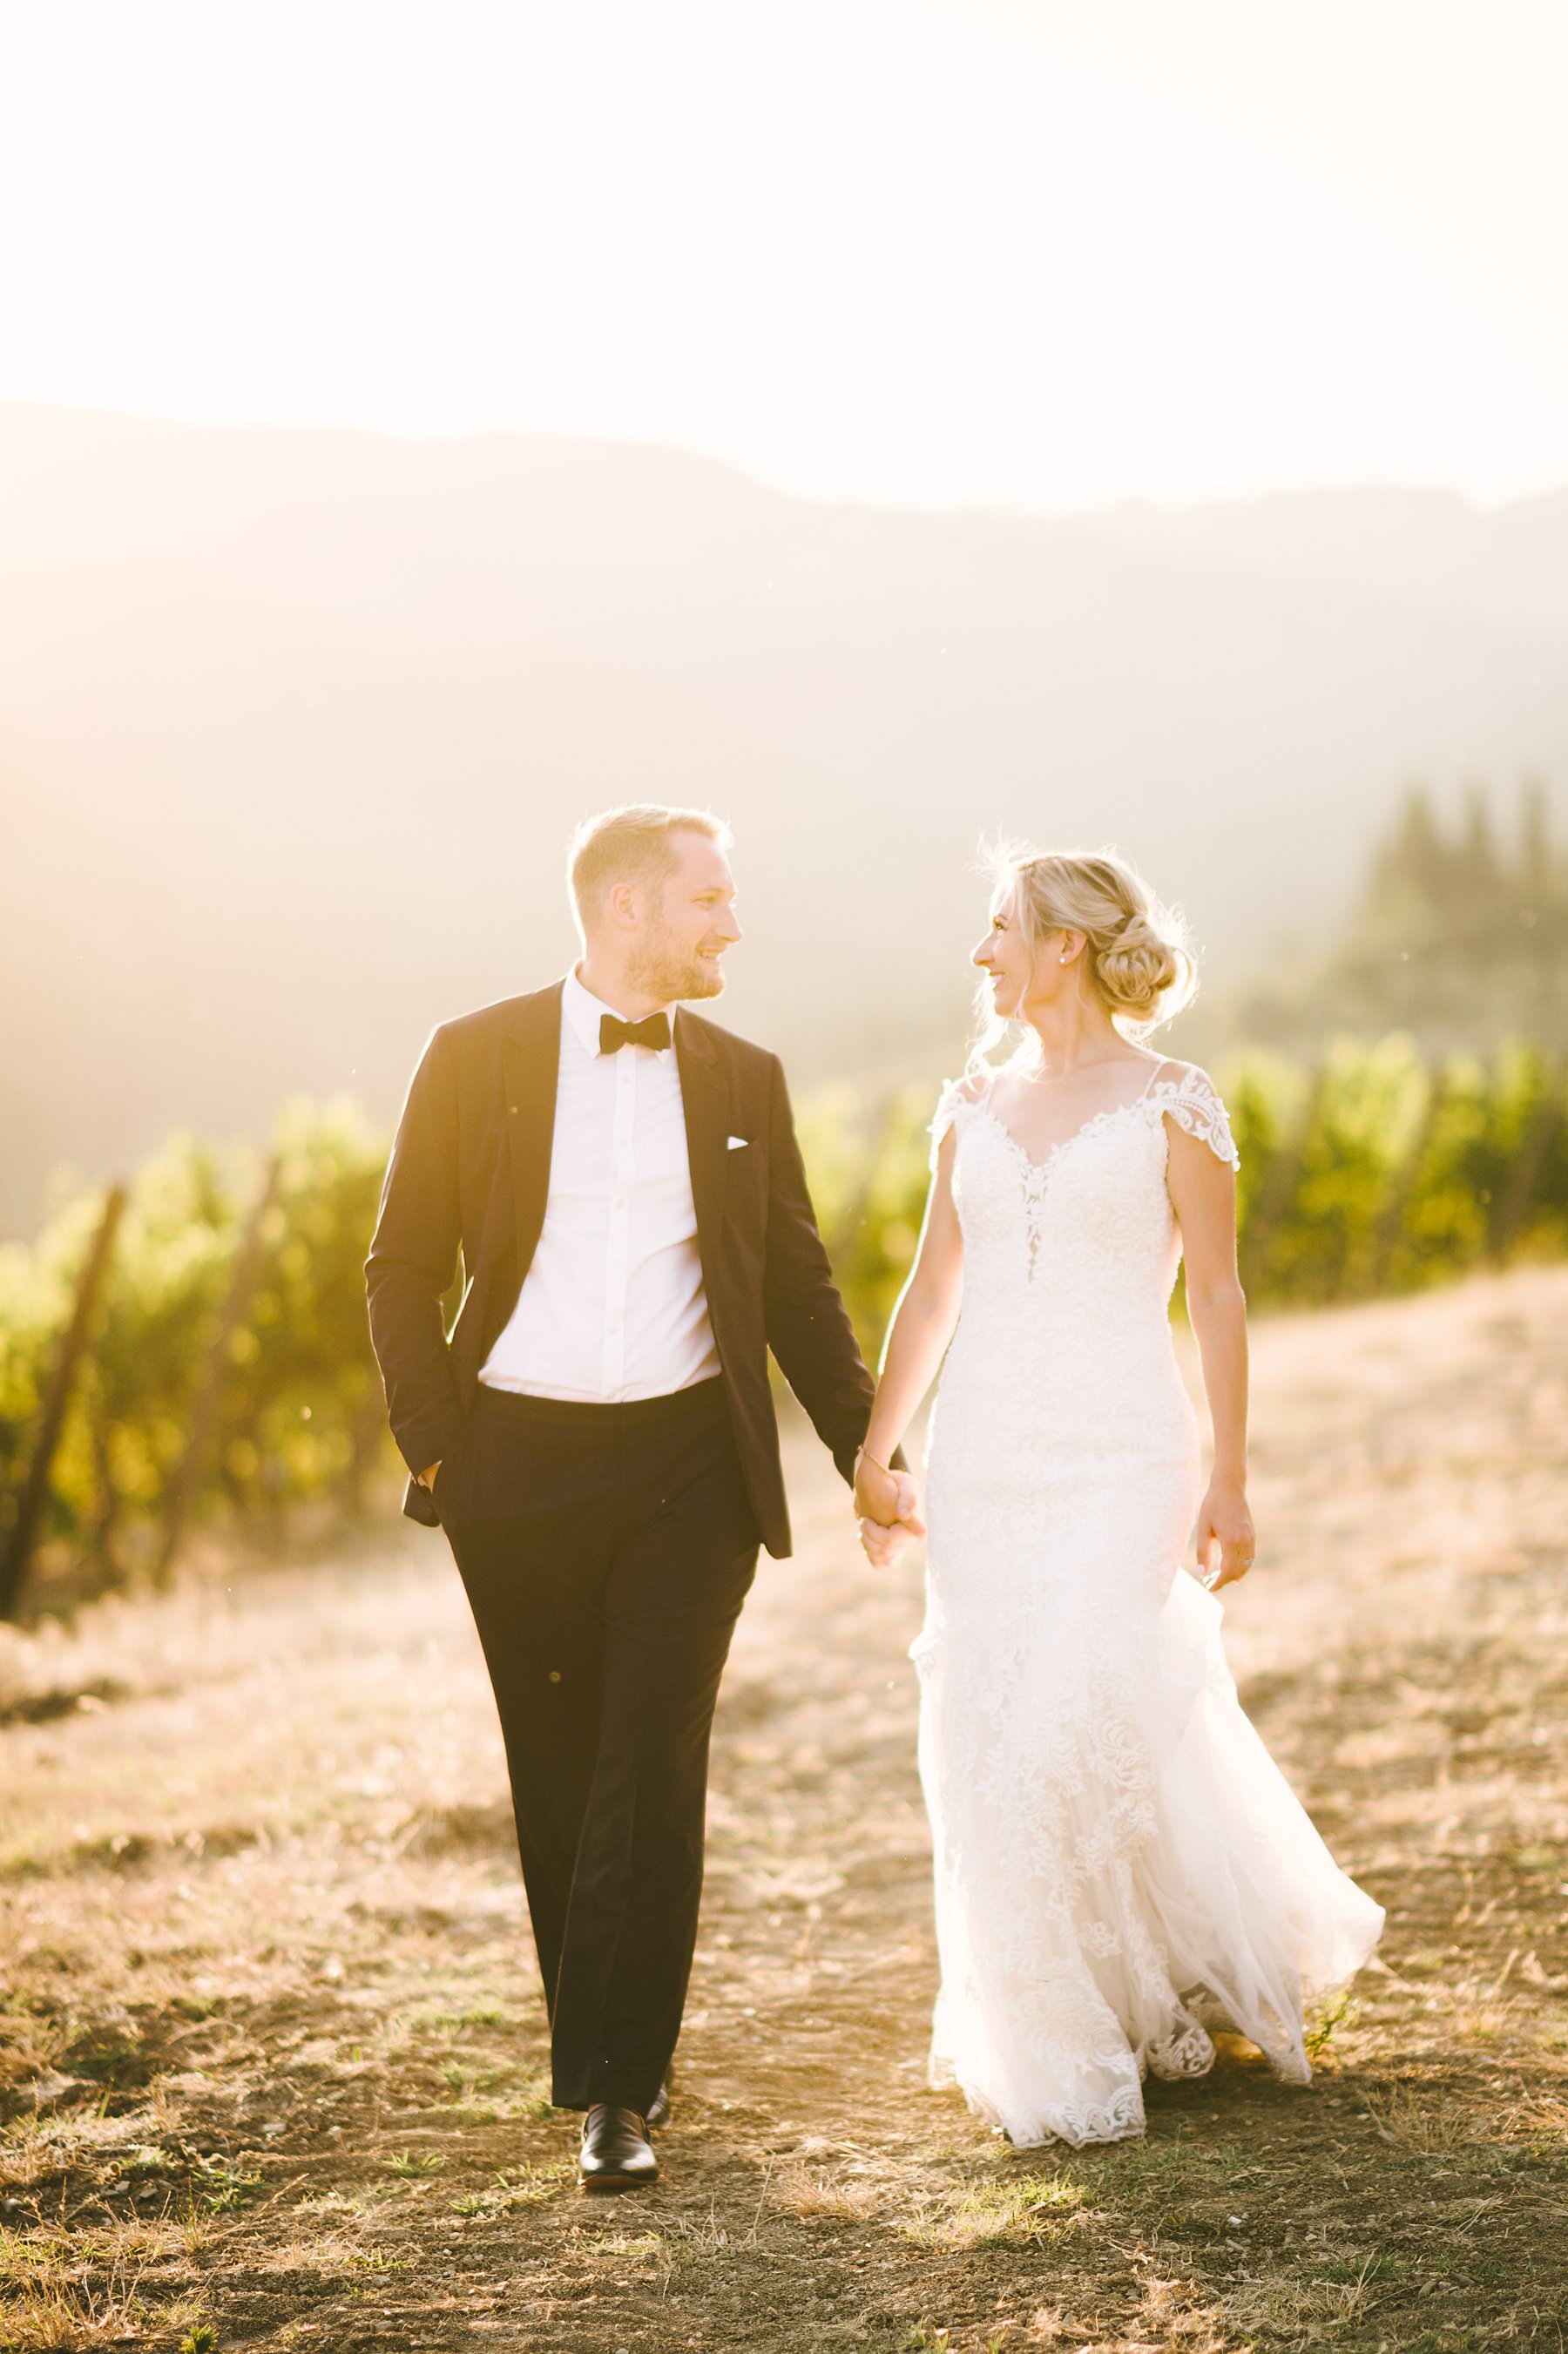 Romantic wedding in Italy at the charming Castello del Trebbio. Dreamy and unforgettable bride and groom wedding portrait during golden hour in the vineyard of the countryside of Tuscany at Castello del Trebbio